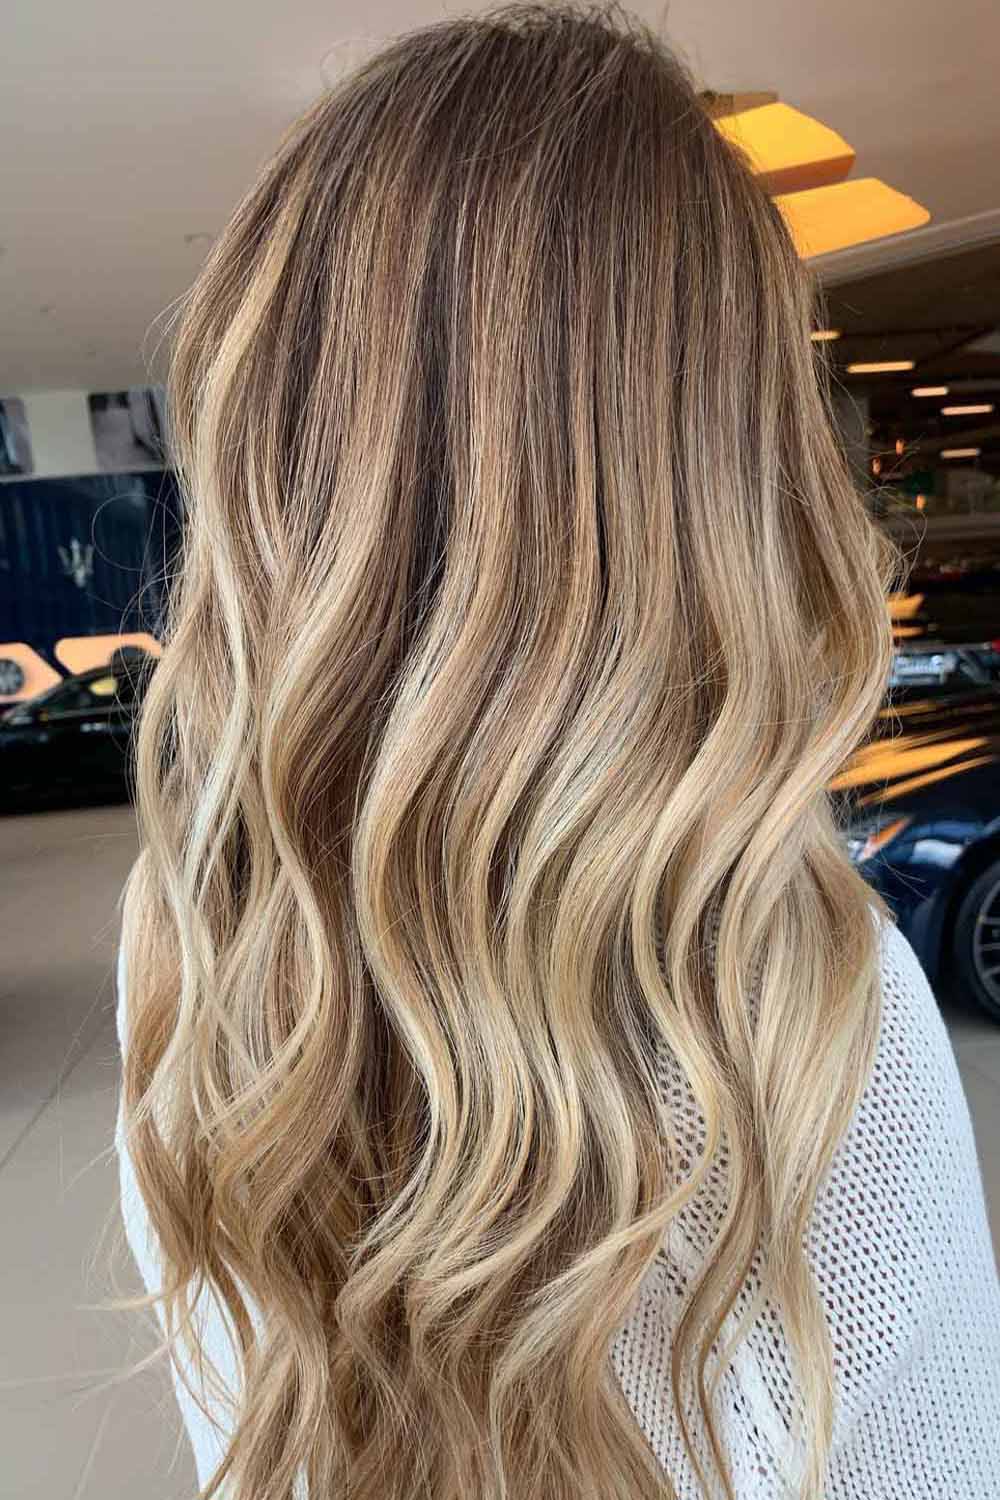 Long Bronde Hair With Highlights